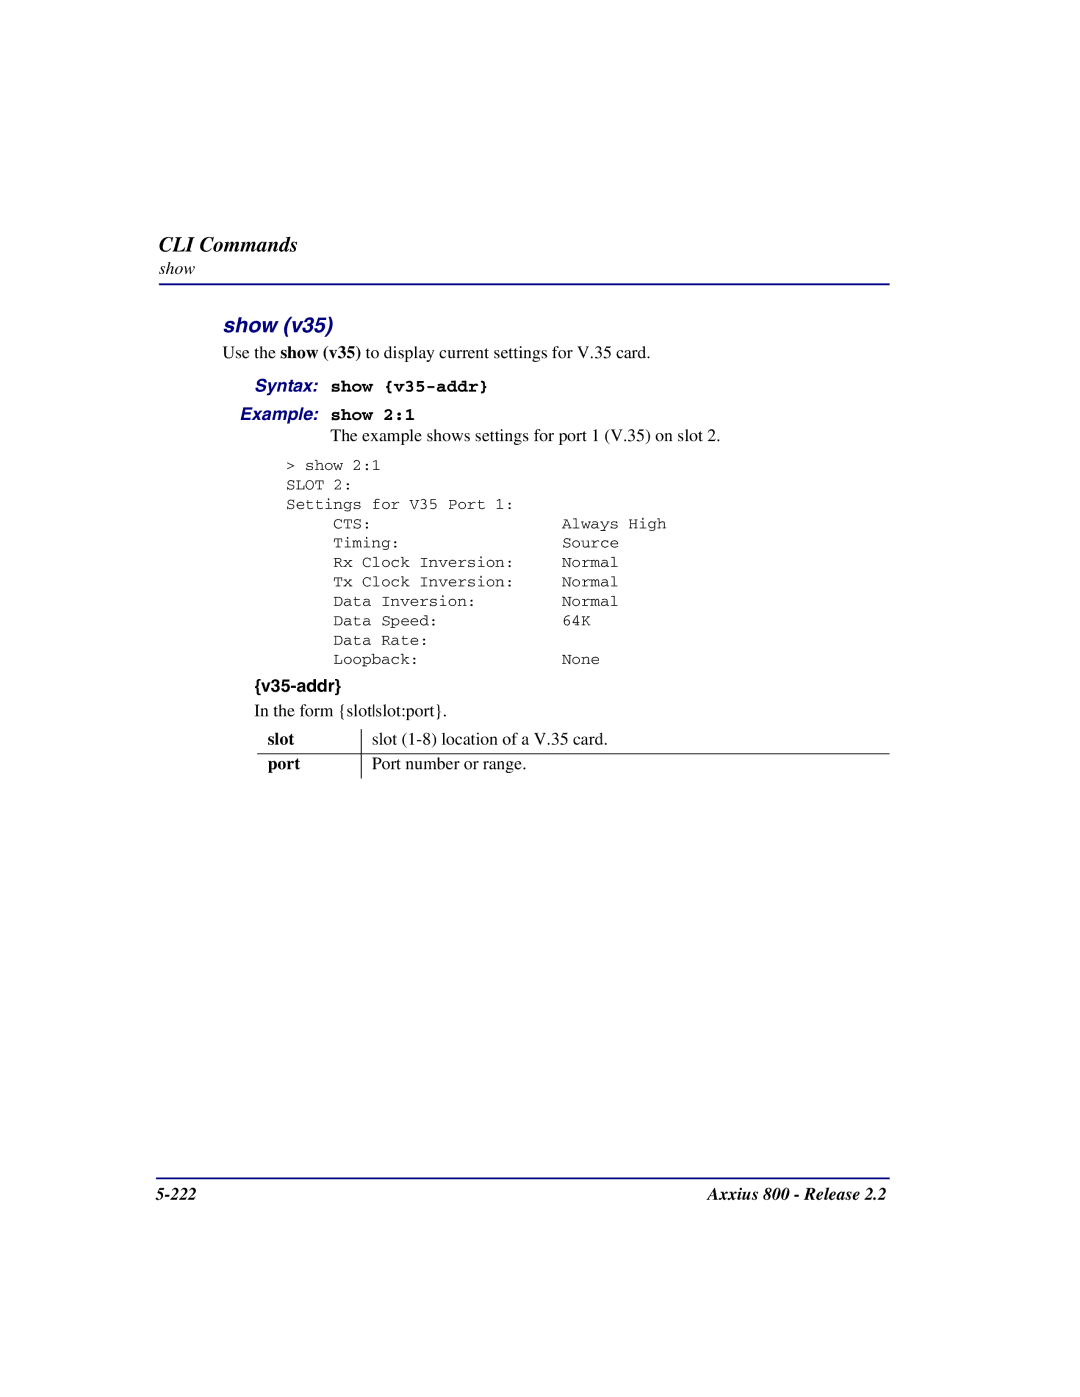 Carrier Access Axxius 800 user manual Show, Syntax show v35-addr 